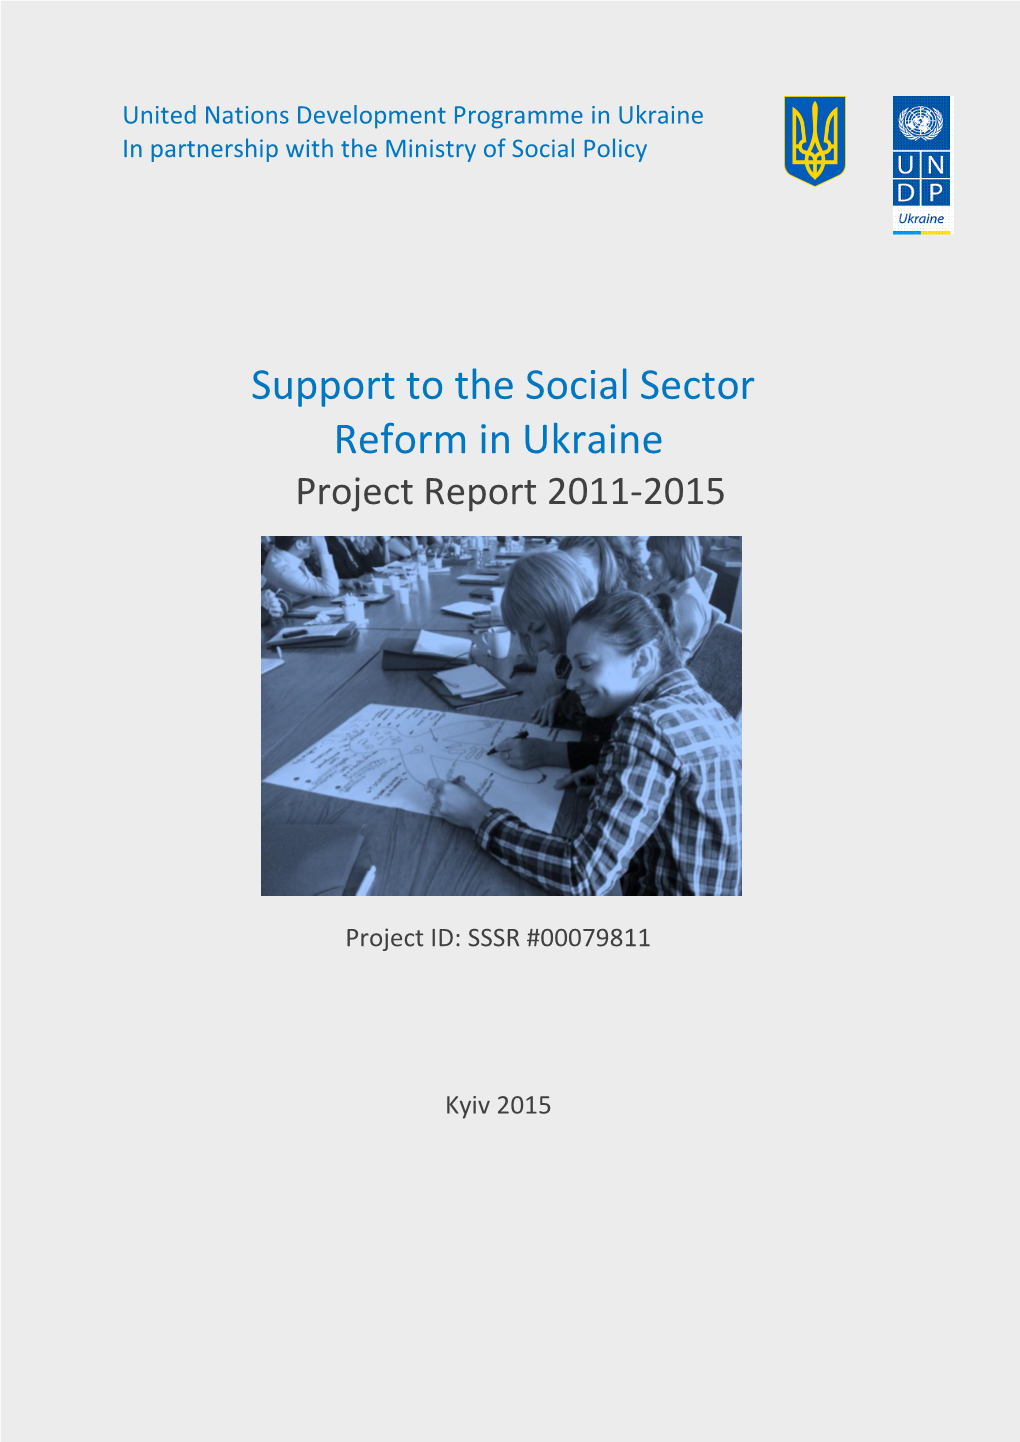 Support to the Social Sector Reform in Ukraine Project Report 2011-2015